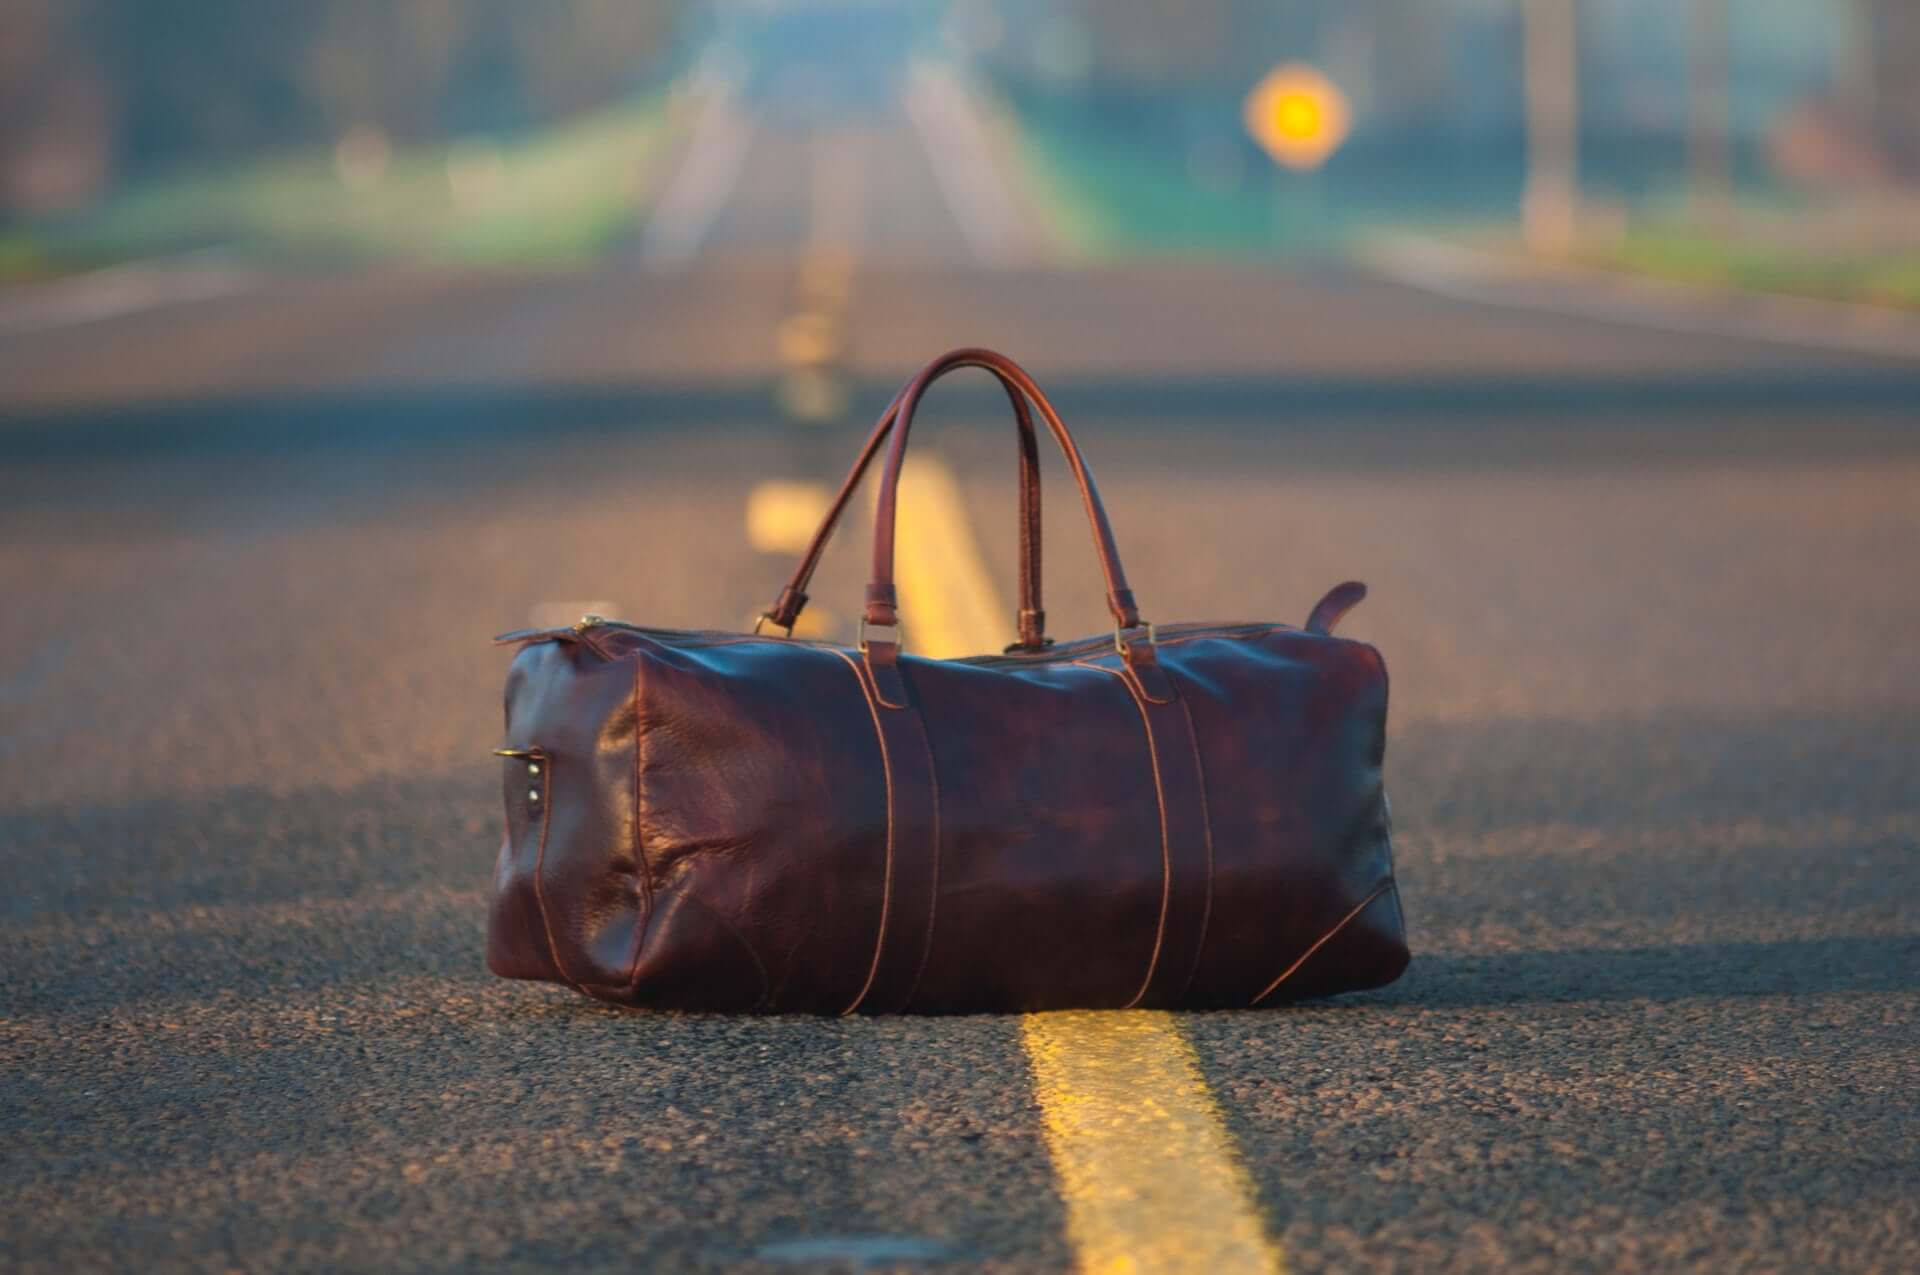 A brown leather duffel bag in the middle of a road.